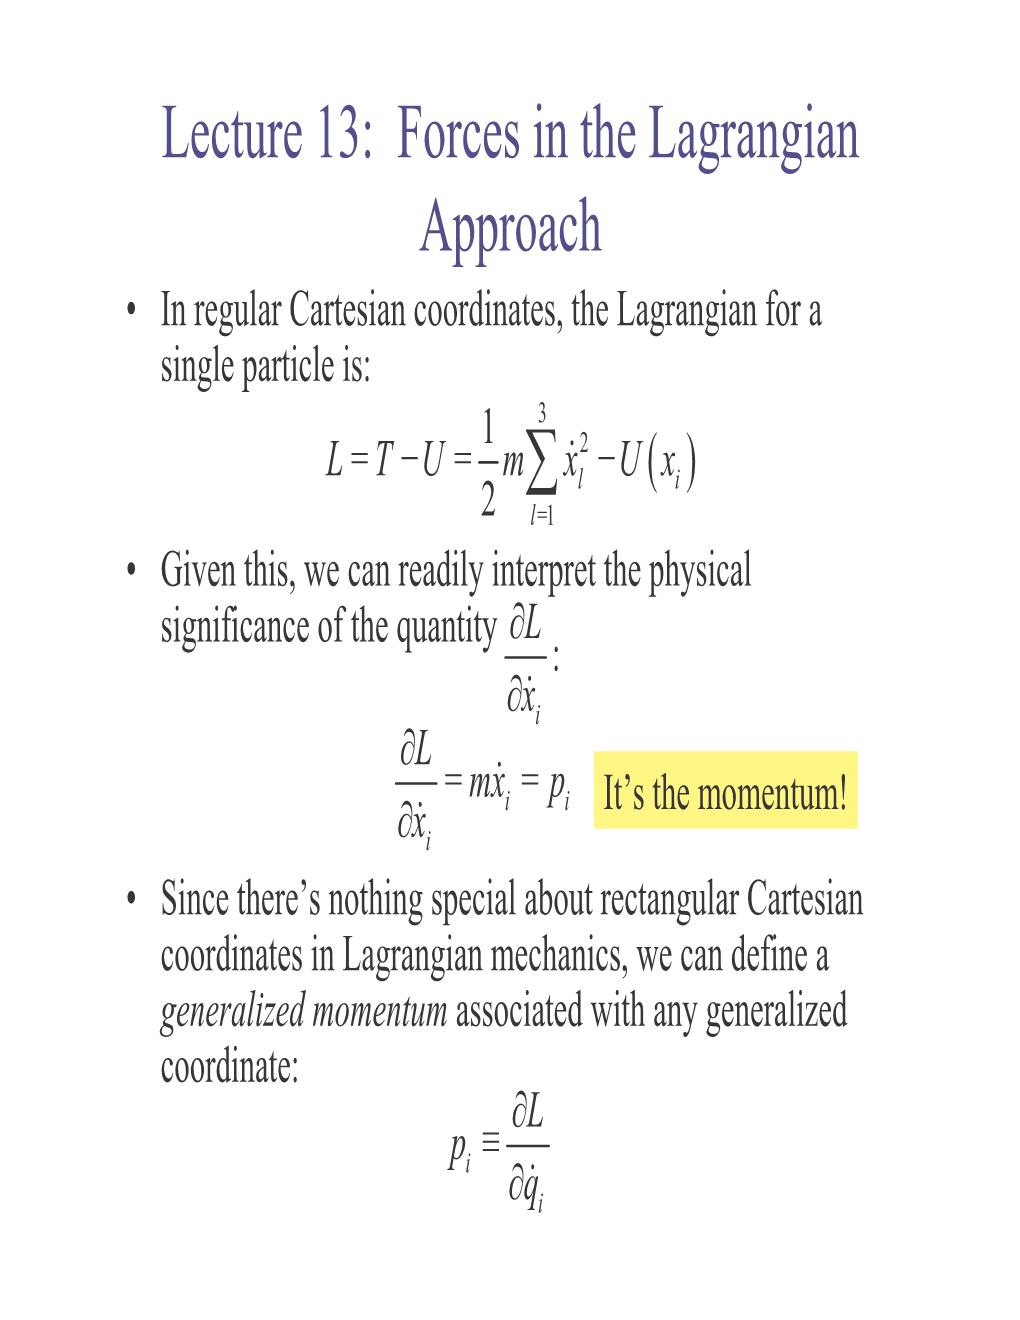 Lecture 13: Forces in the Lagrangian Approach